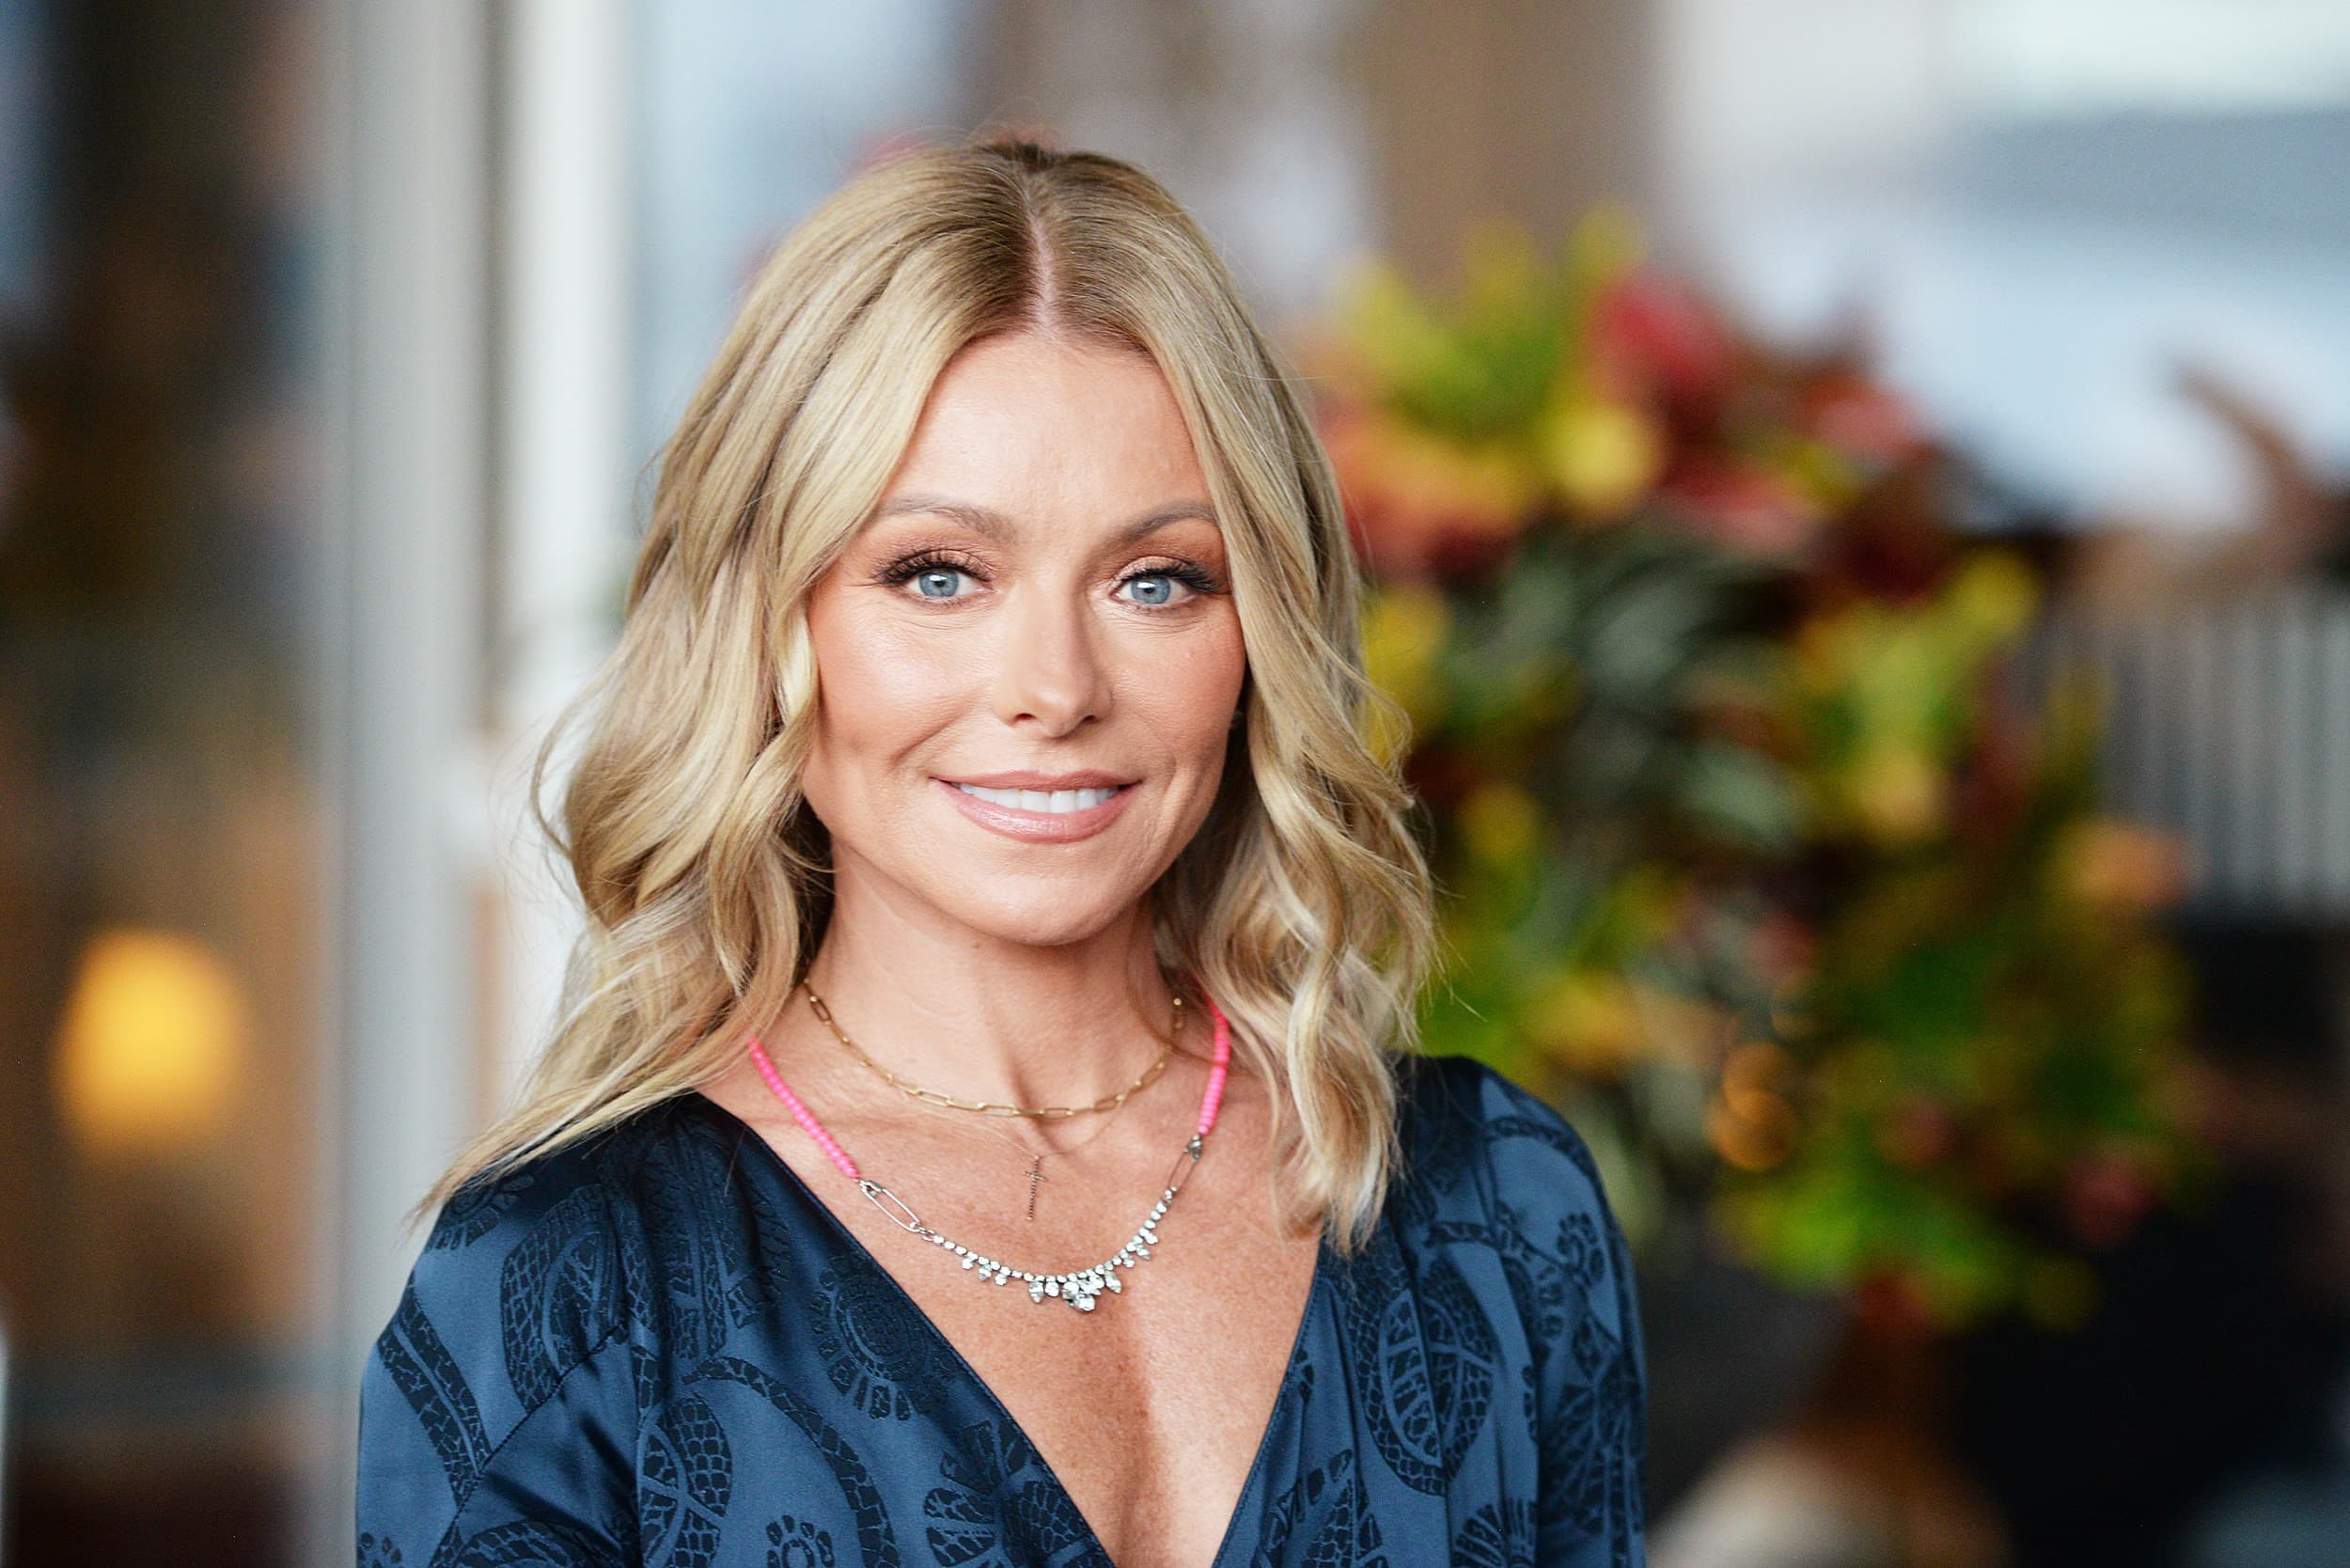 Kelly Ripa warns people not to cut their own hair at home